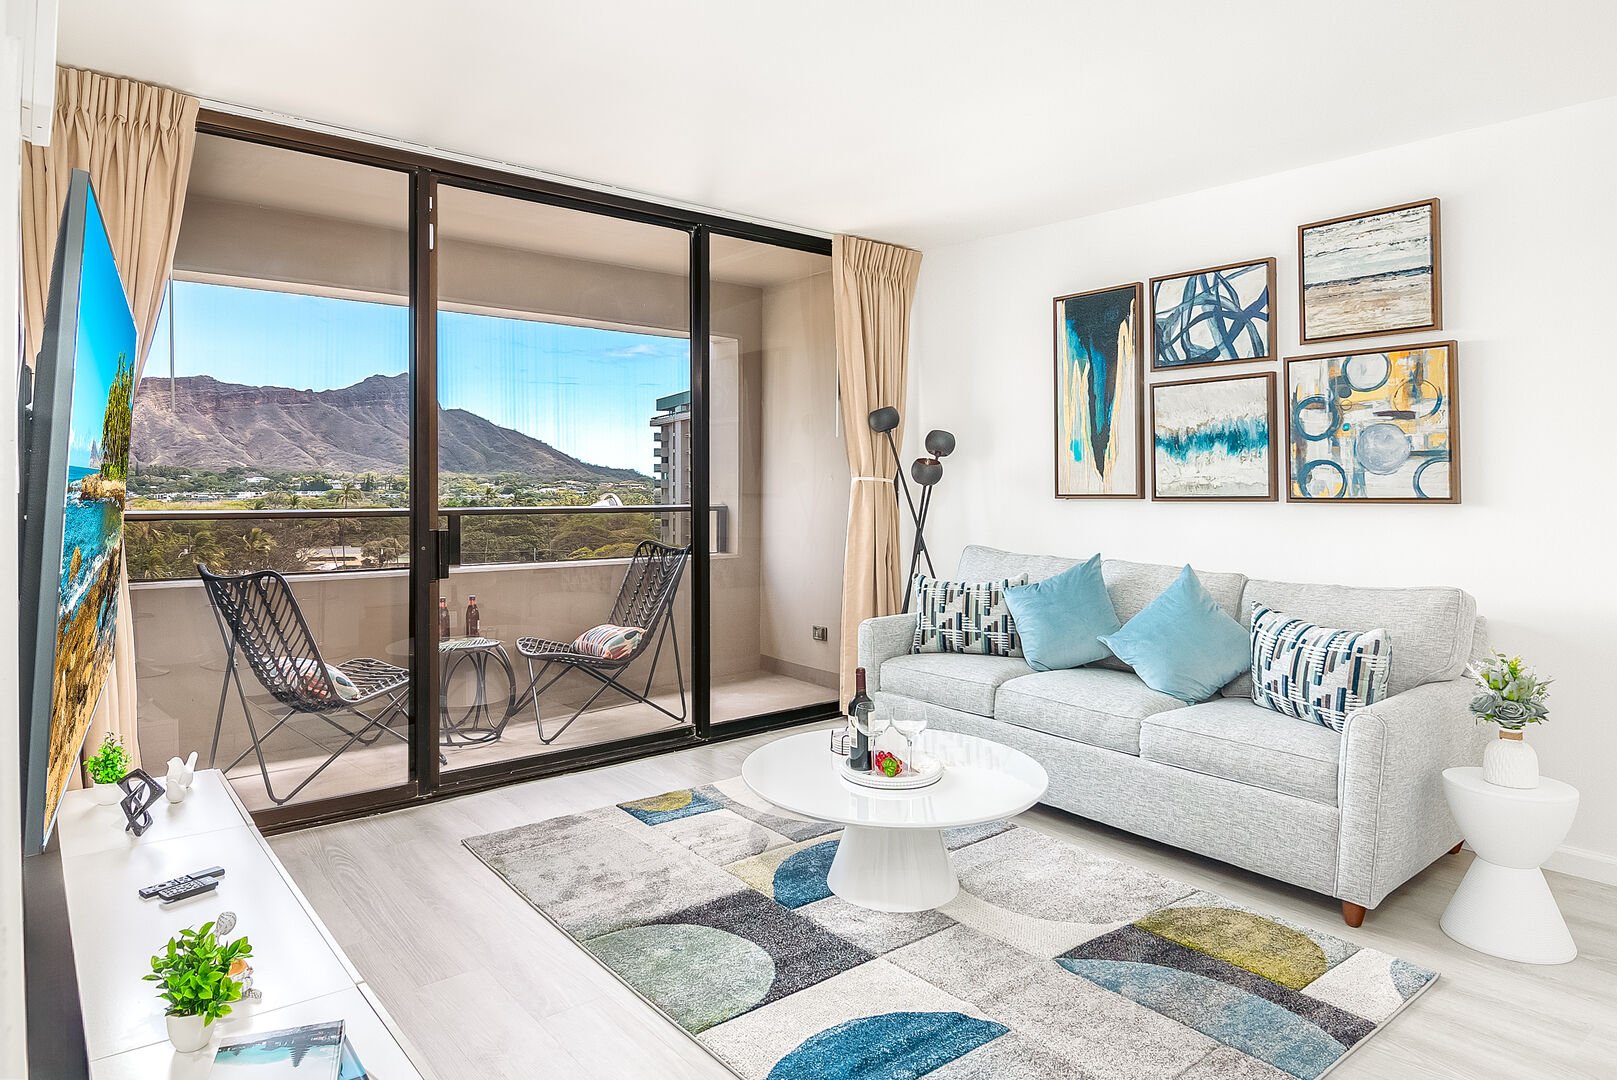 Your living area has a pull-out sleeper sofa, a coffee table, a 65'' Samsung Smart TV, and a Diamond Head view.